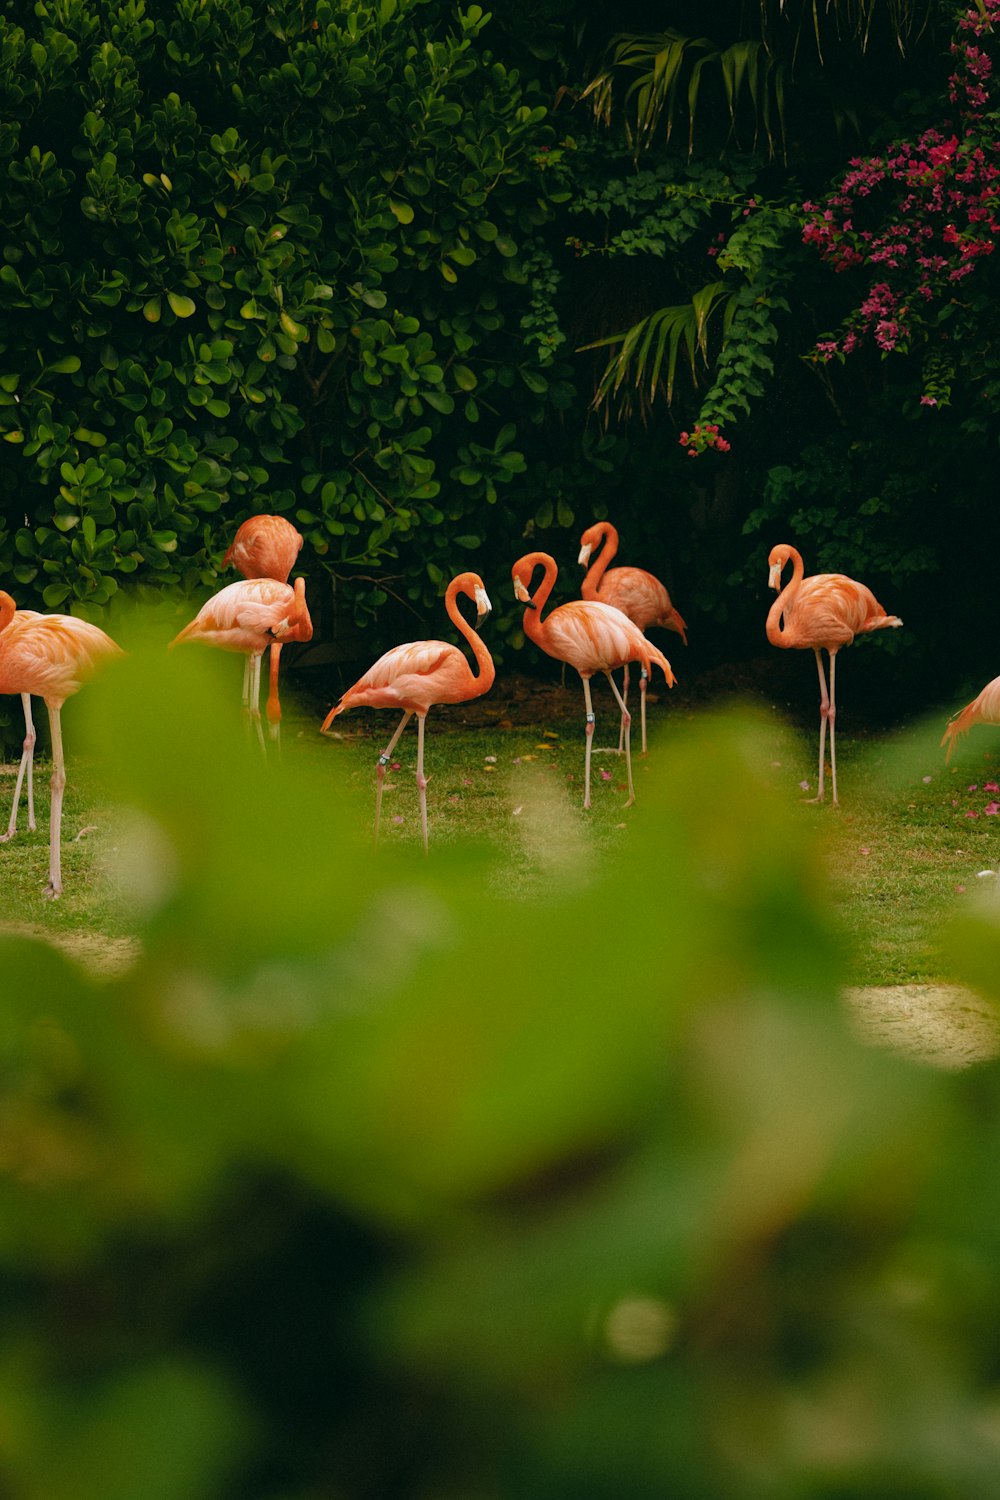 a group of flamingos in a grassy area